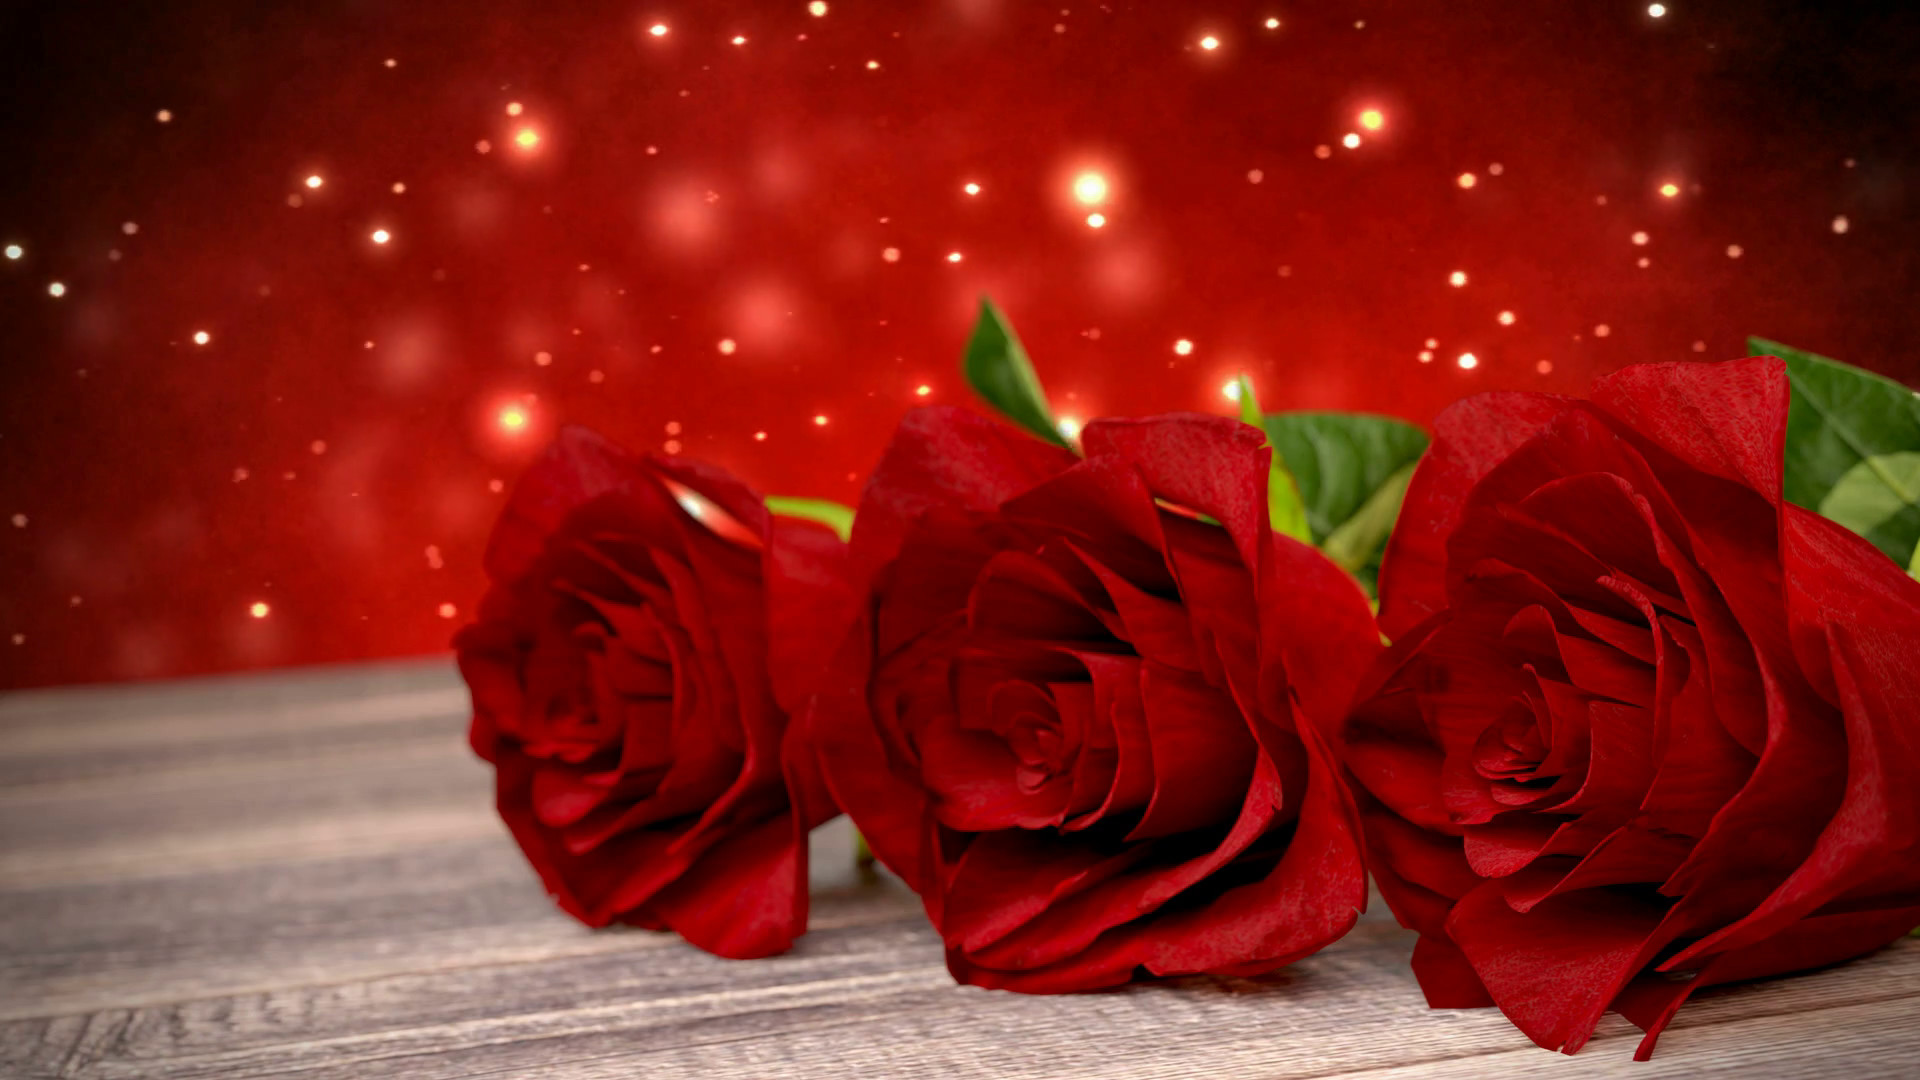 1920x1080 seamless loop birthday background with red roses on wooden desk. 3D render  Motion Background - VideoBlocks